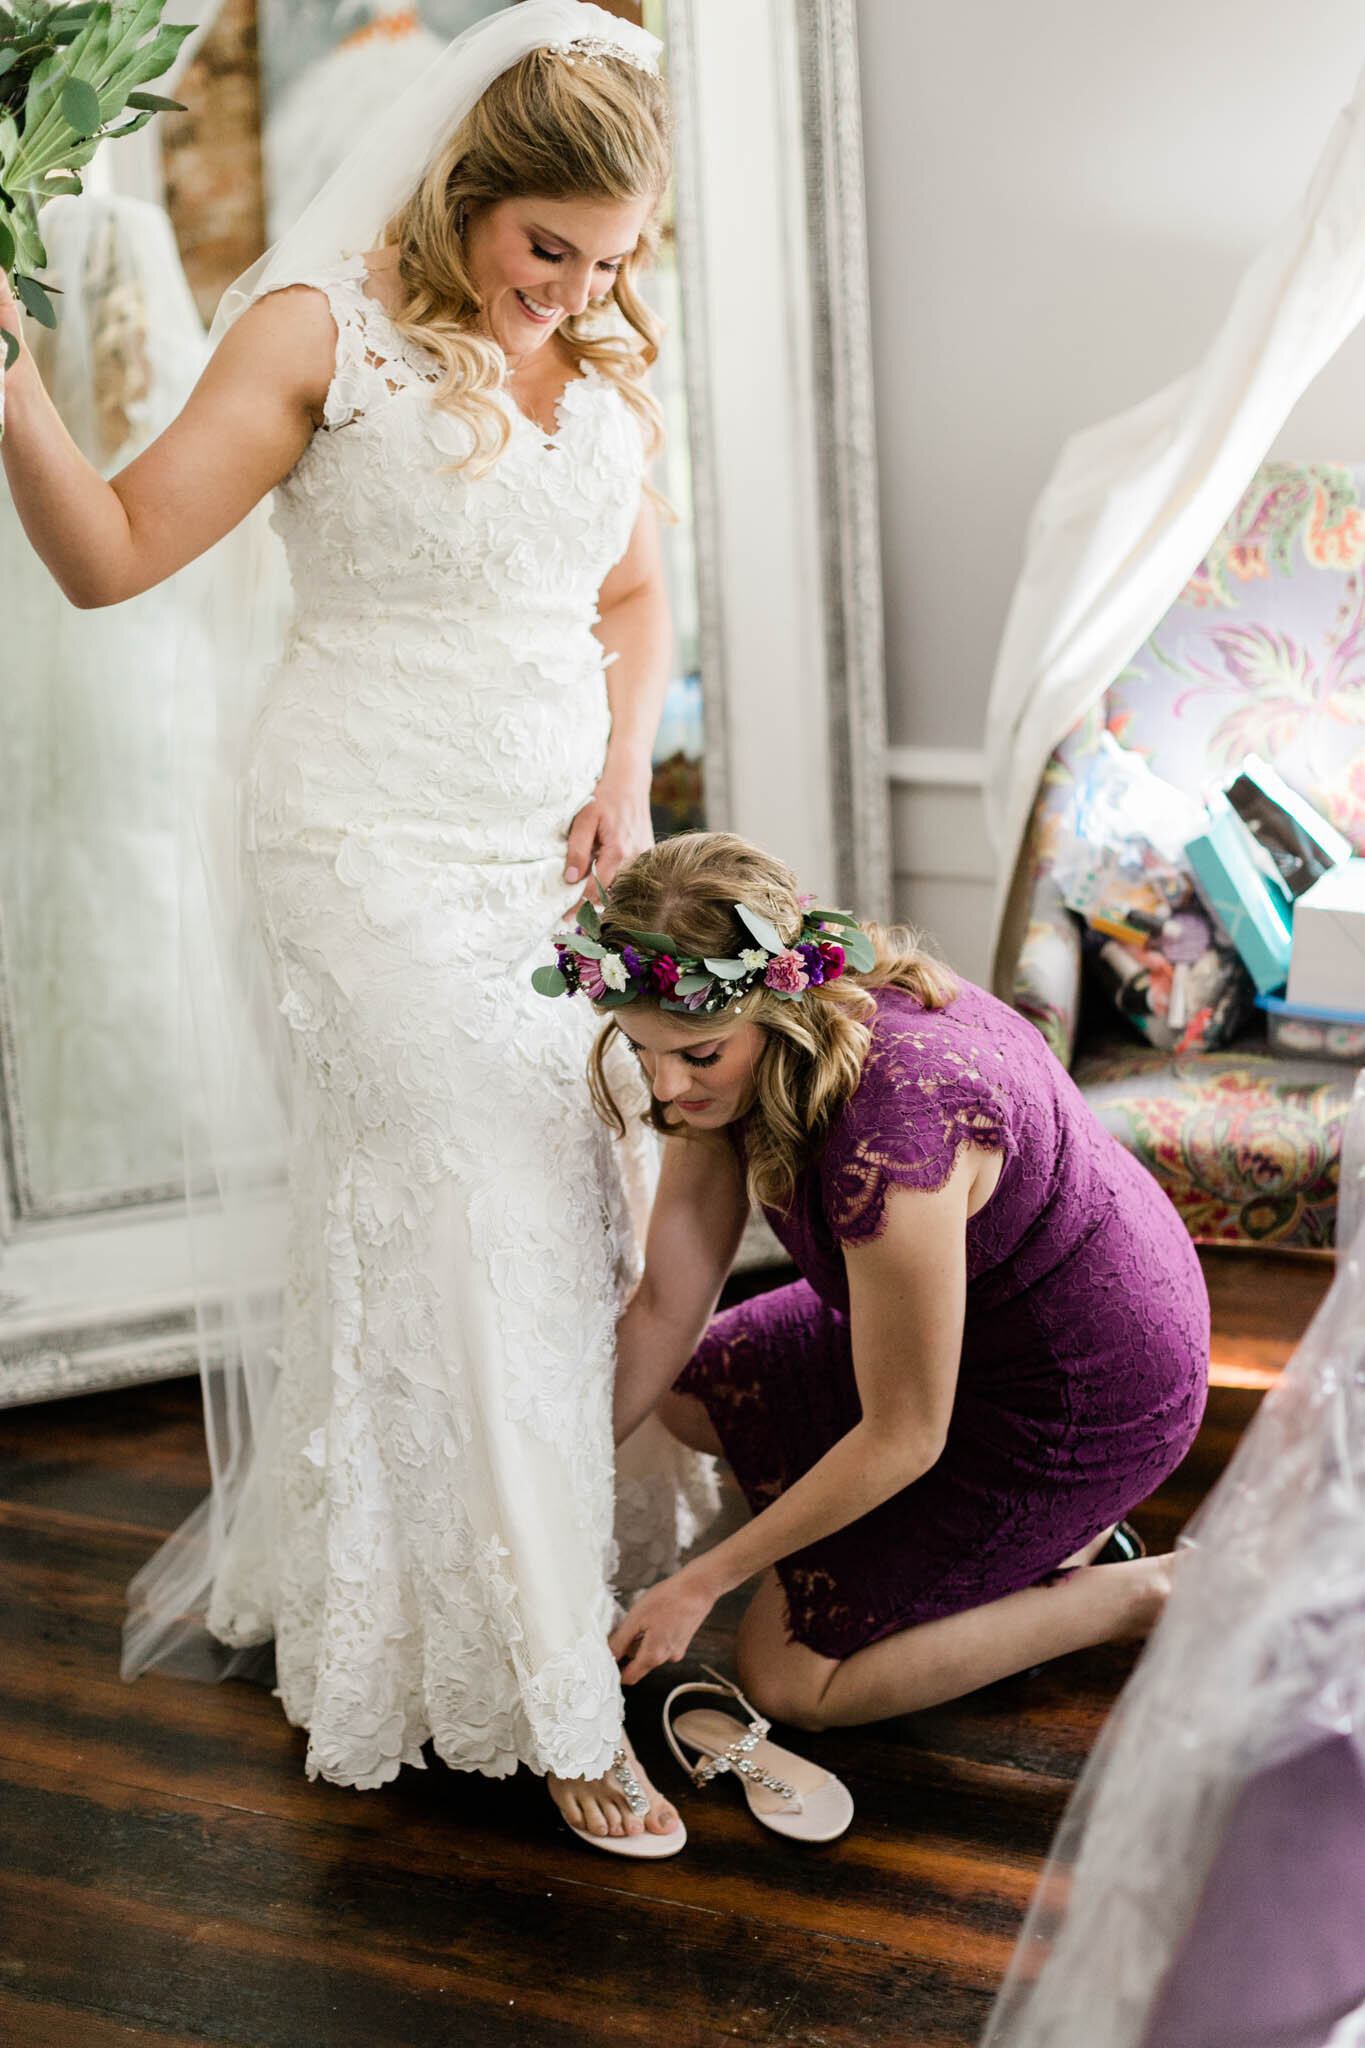 Durham Wedding Photographer | By G. Lin Photography | Bridesmaid putting shoe on bride